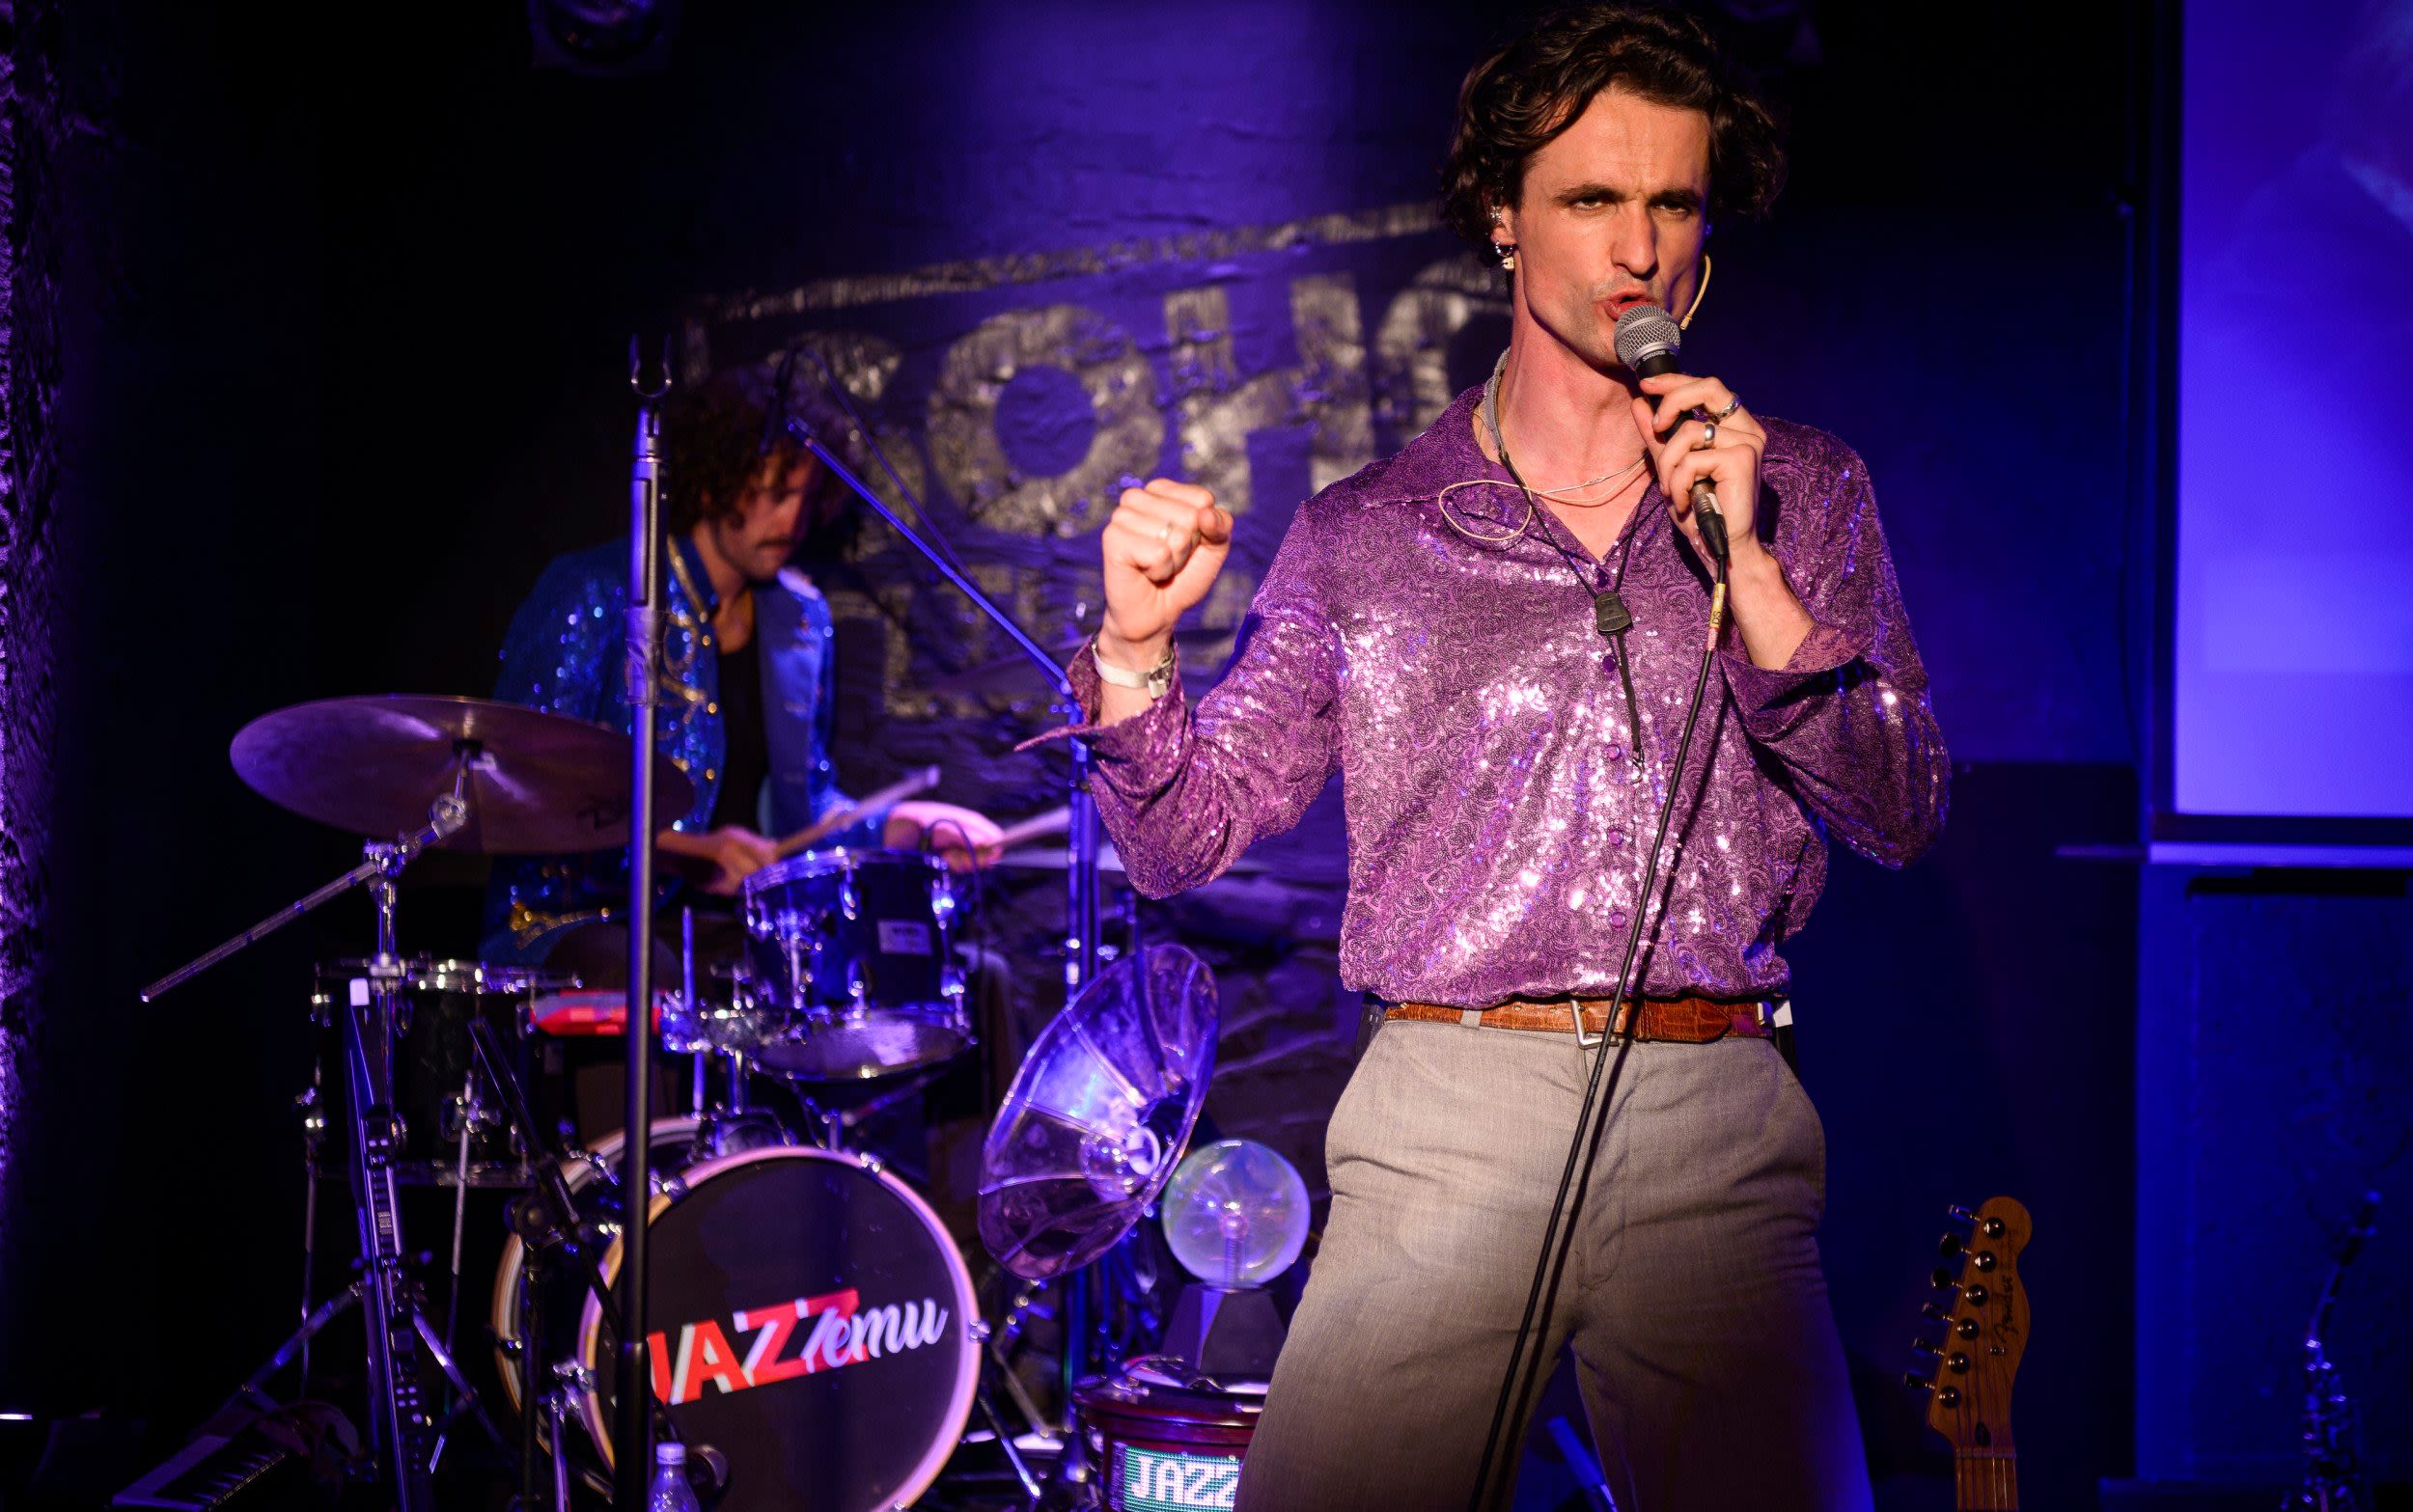 Jazz Emu, Soho Theatre: A deliciously silly hour Britain’s finest young musical comedian